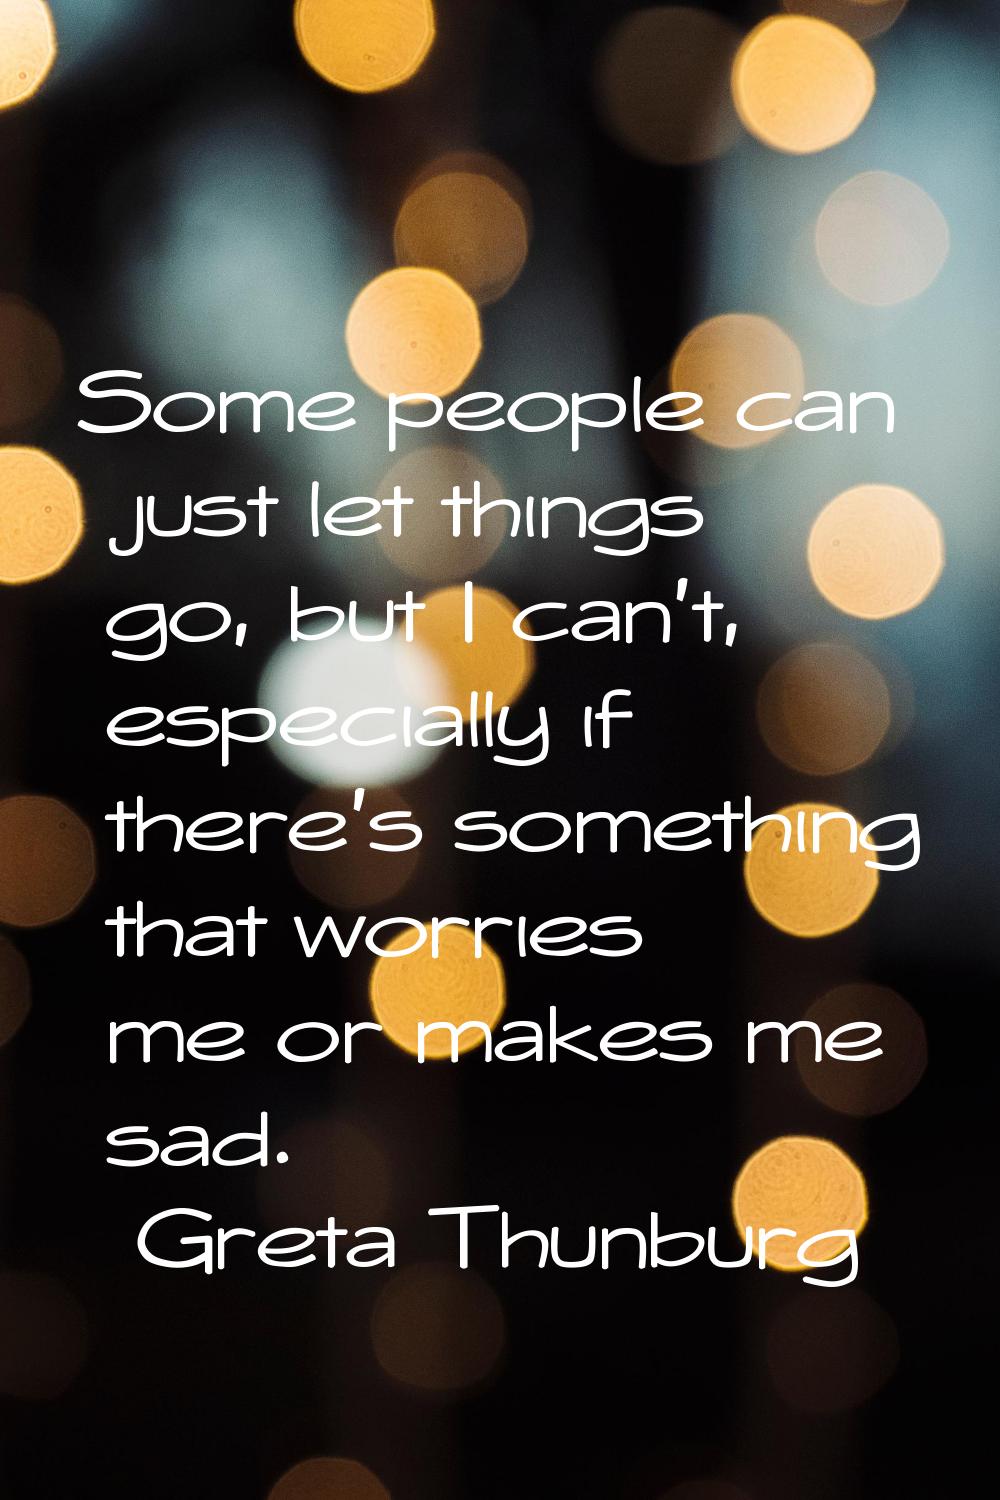 Some people can just let things go, but I can't, especially if there's something that worries me or